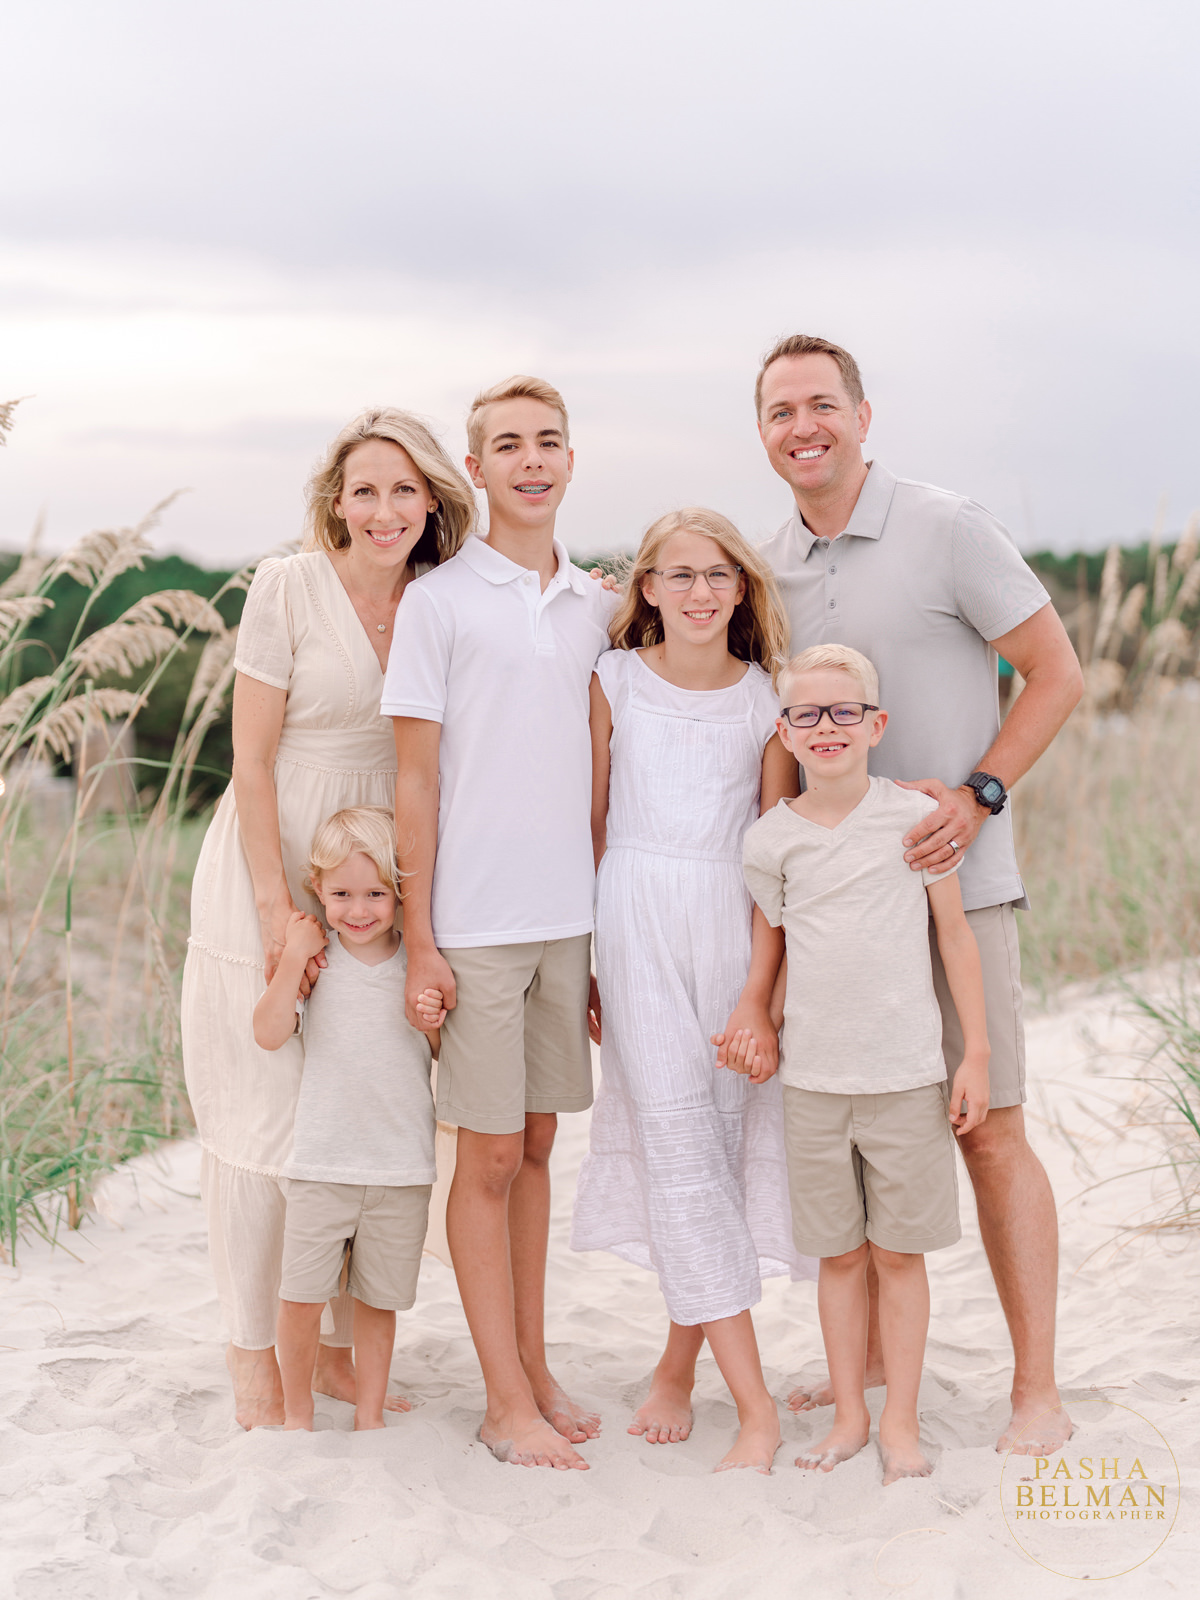 Neutral-Creamy-Look-1 70+ Best Chosen Family Photo Outfit Ideas in Summer 2022